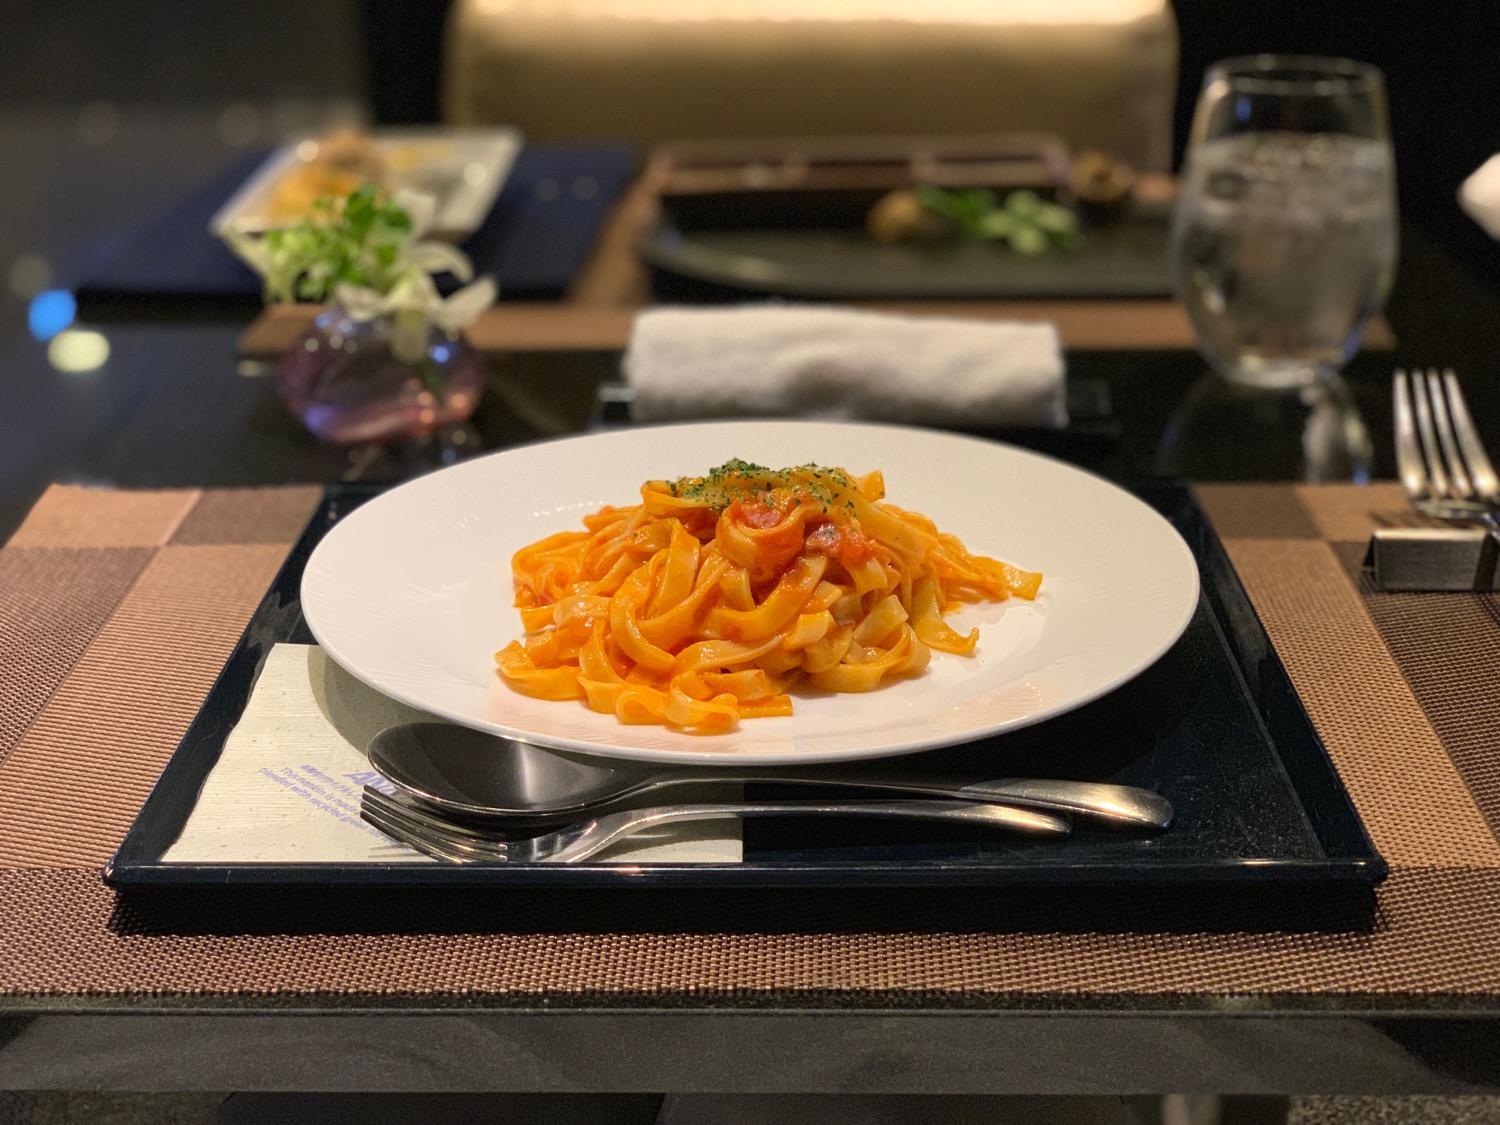 a plate of pasta on a tray